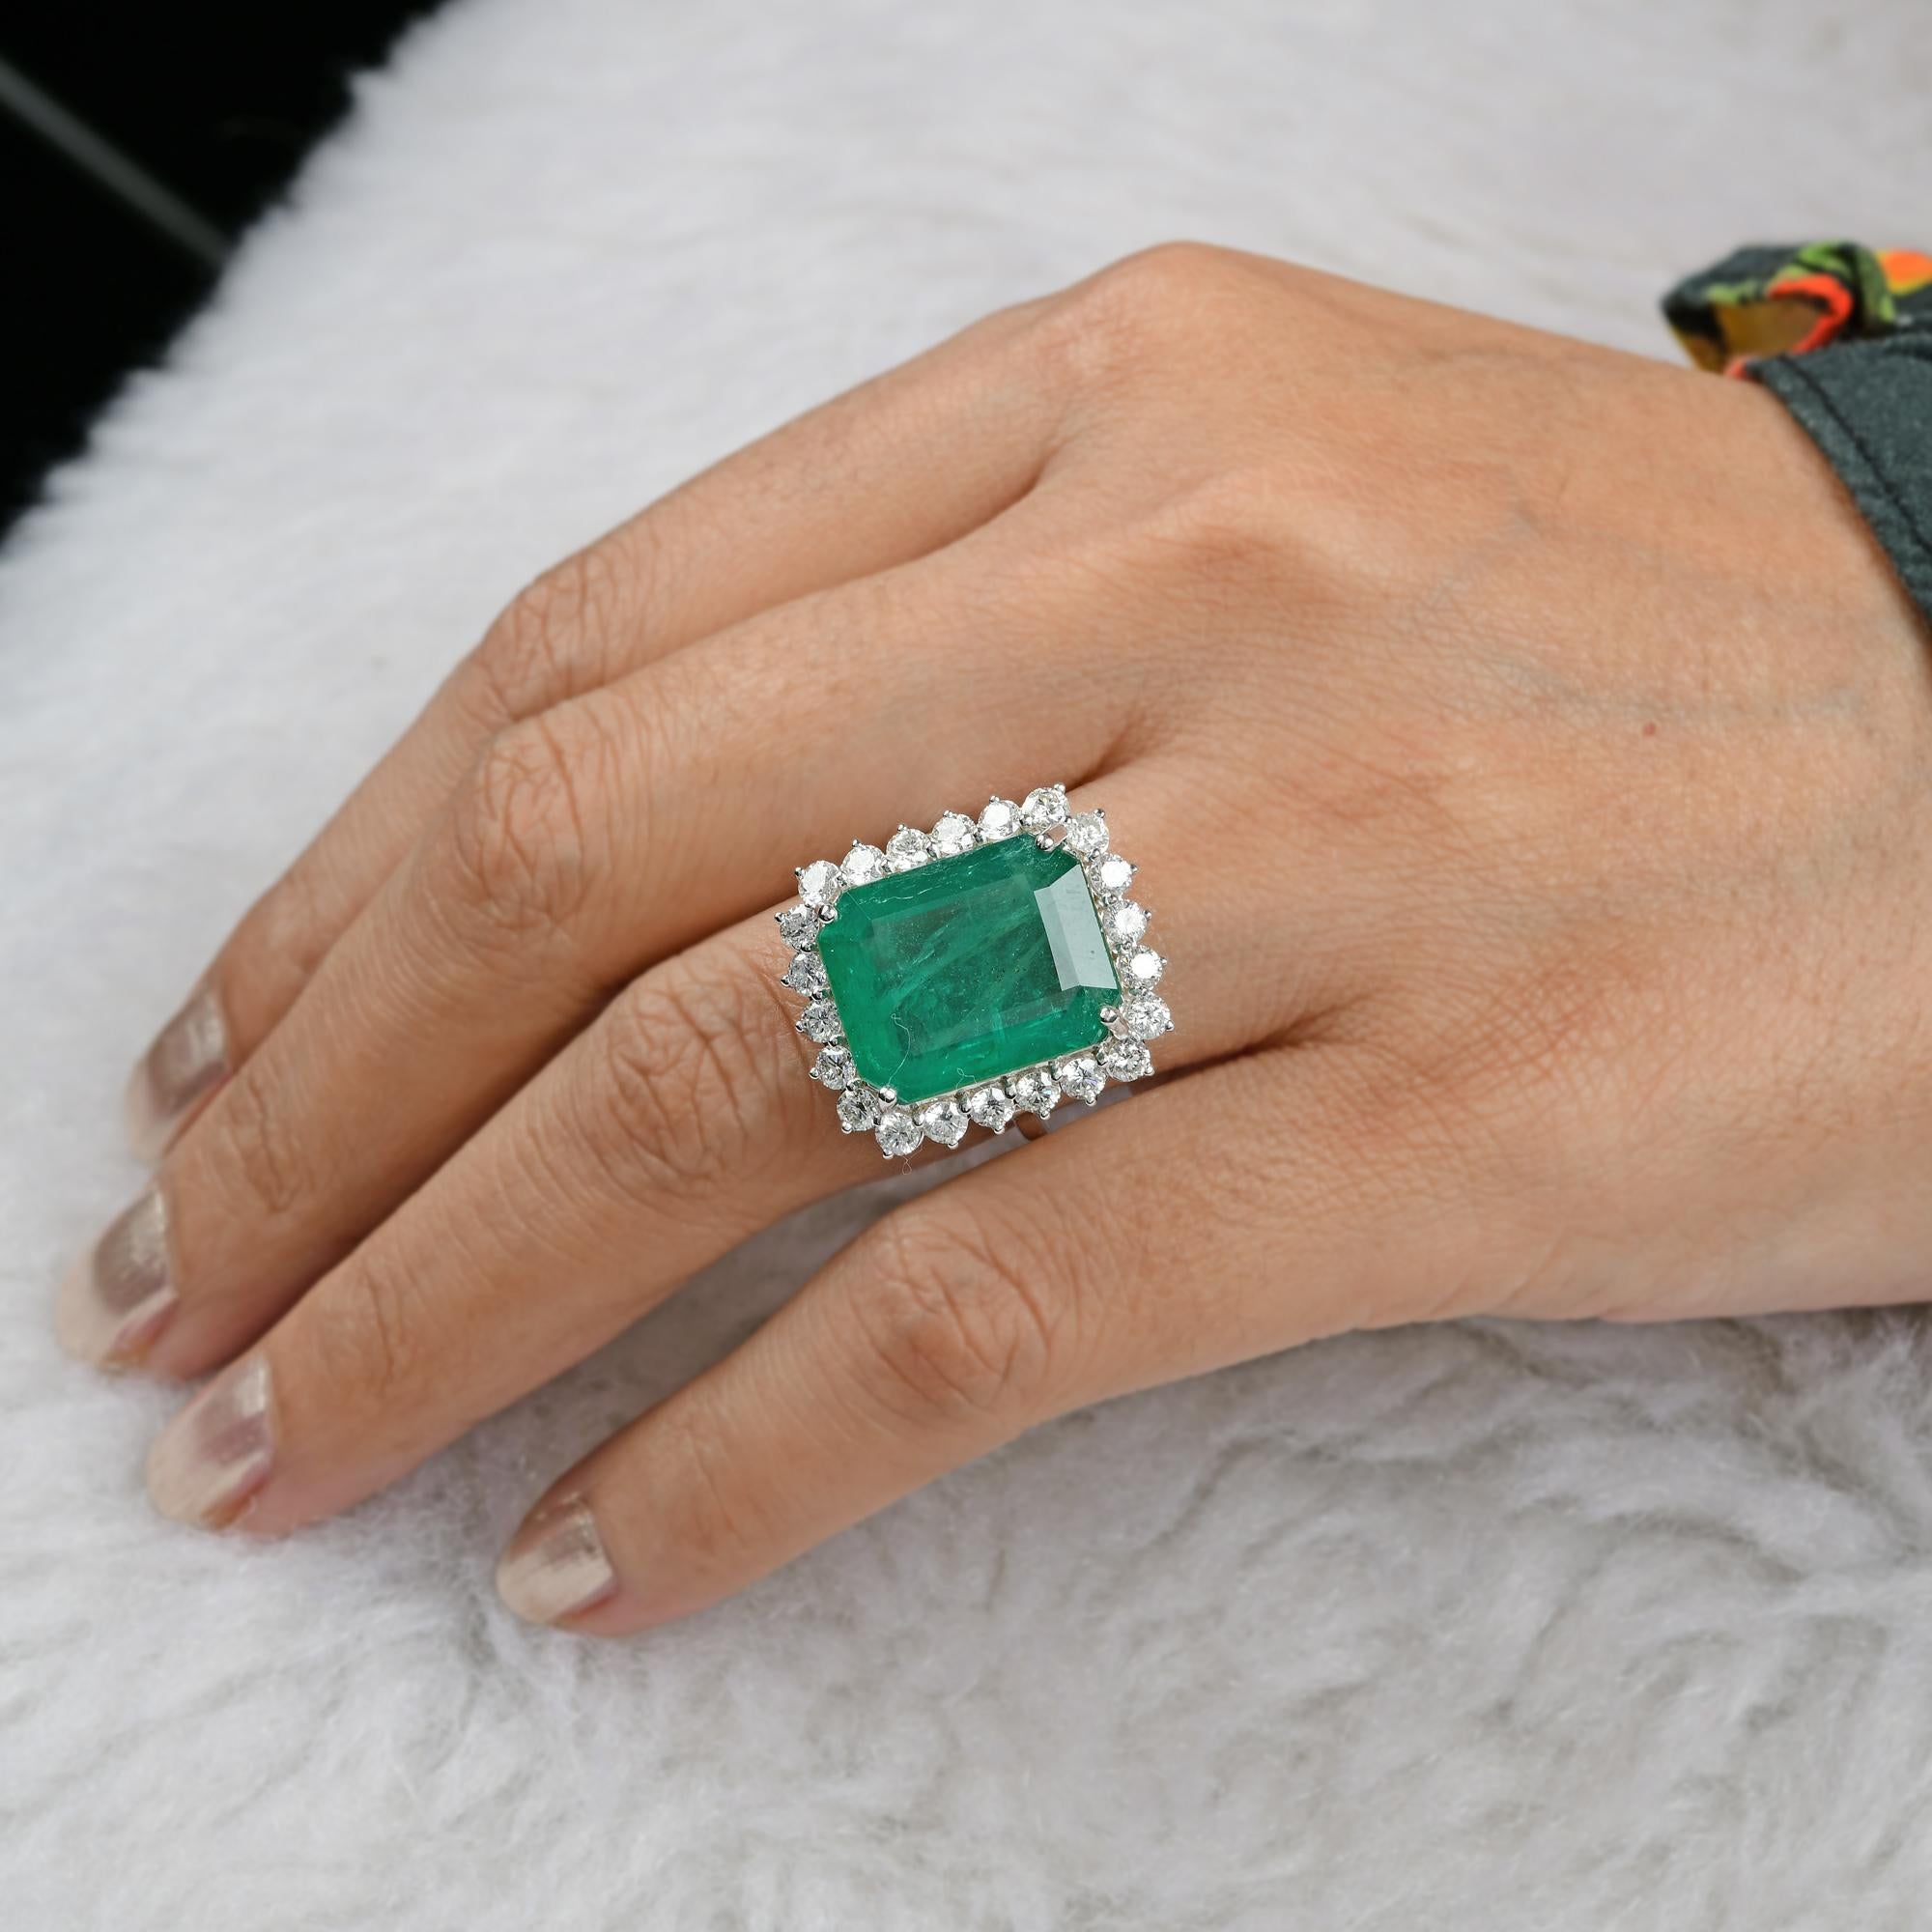 For Sale:  13.87 Total Carat Natural Emerald Gemstone Cocktail Ring Diamond 18k White Gold 4